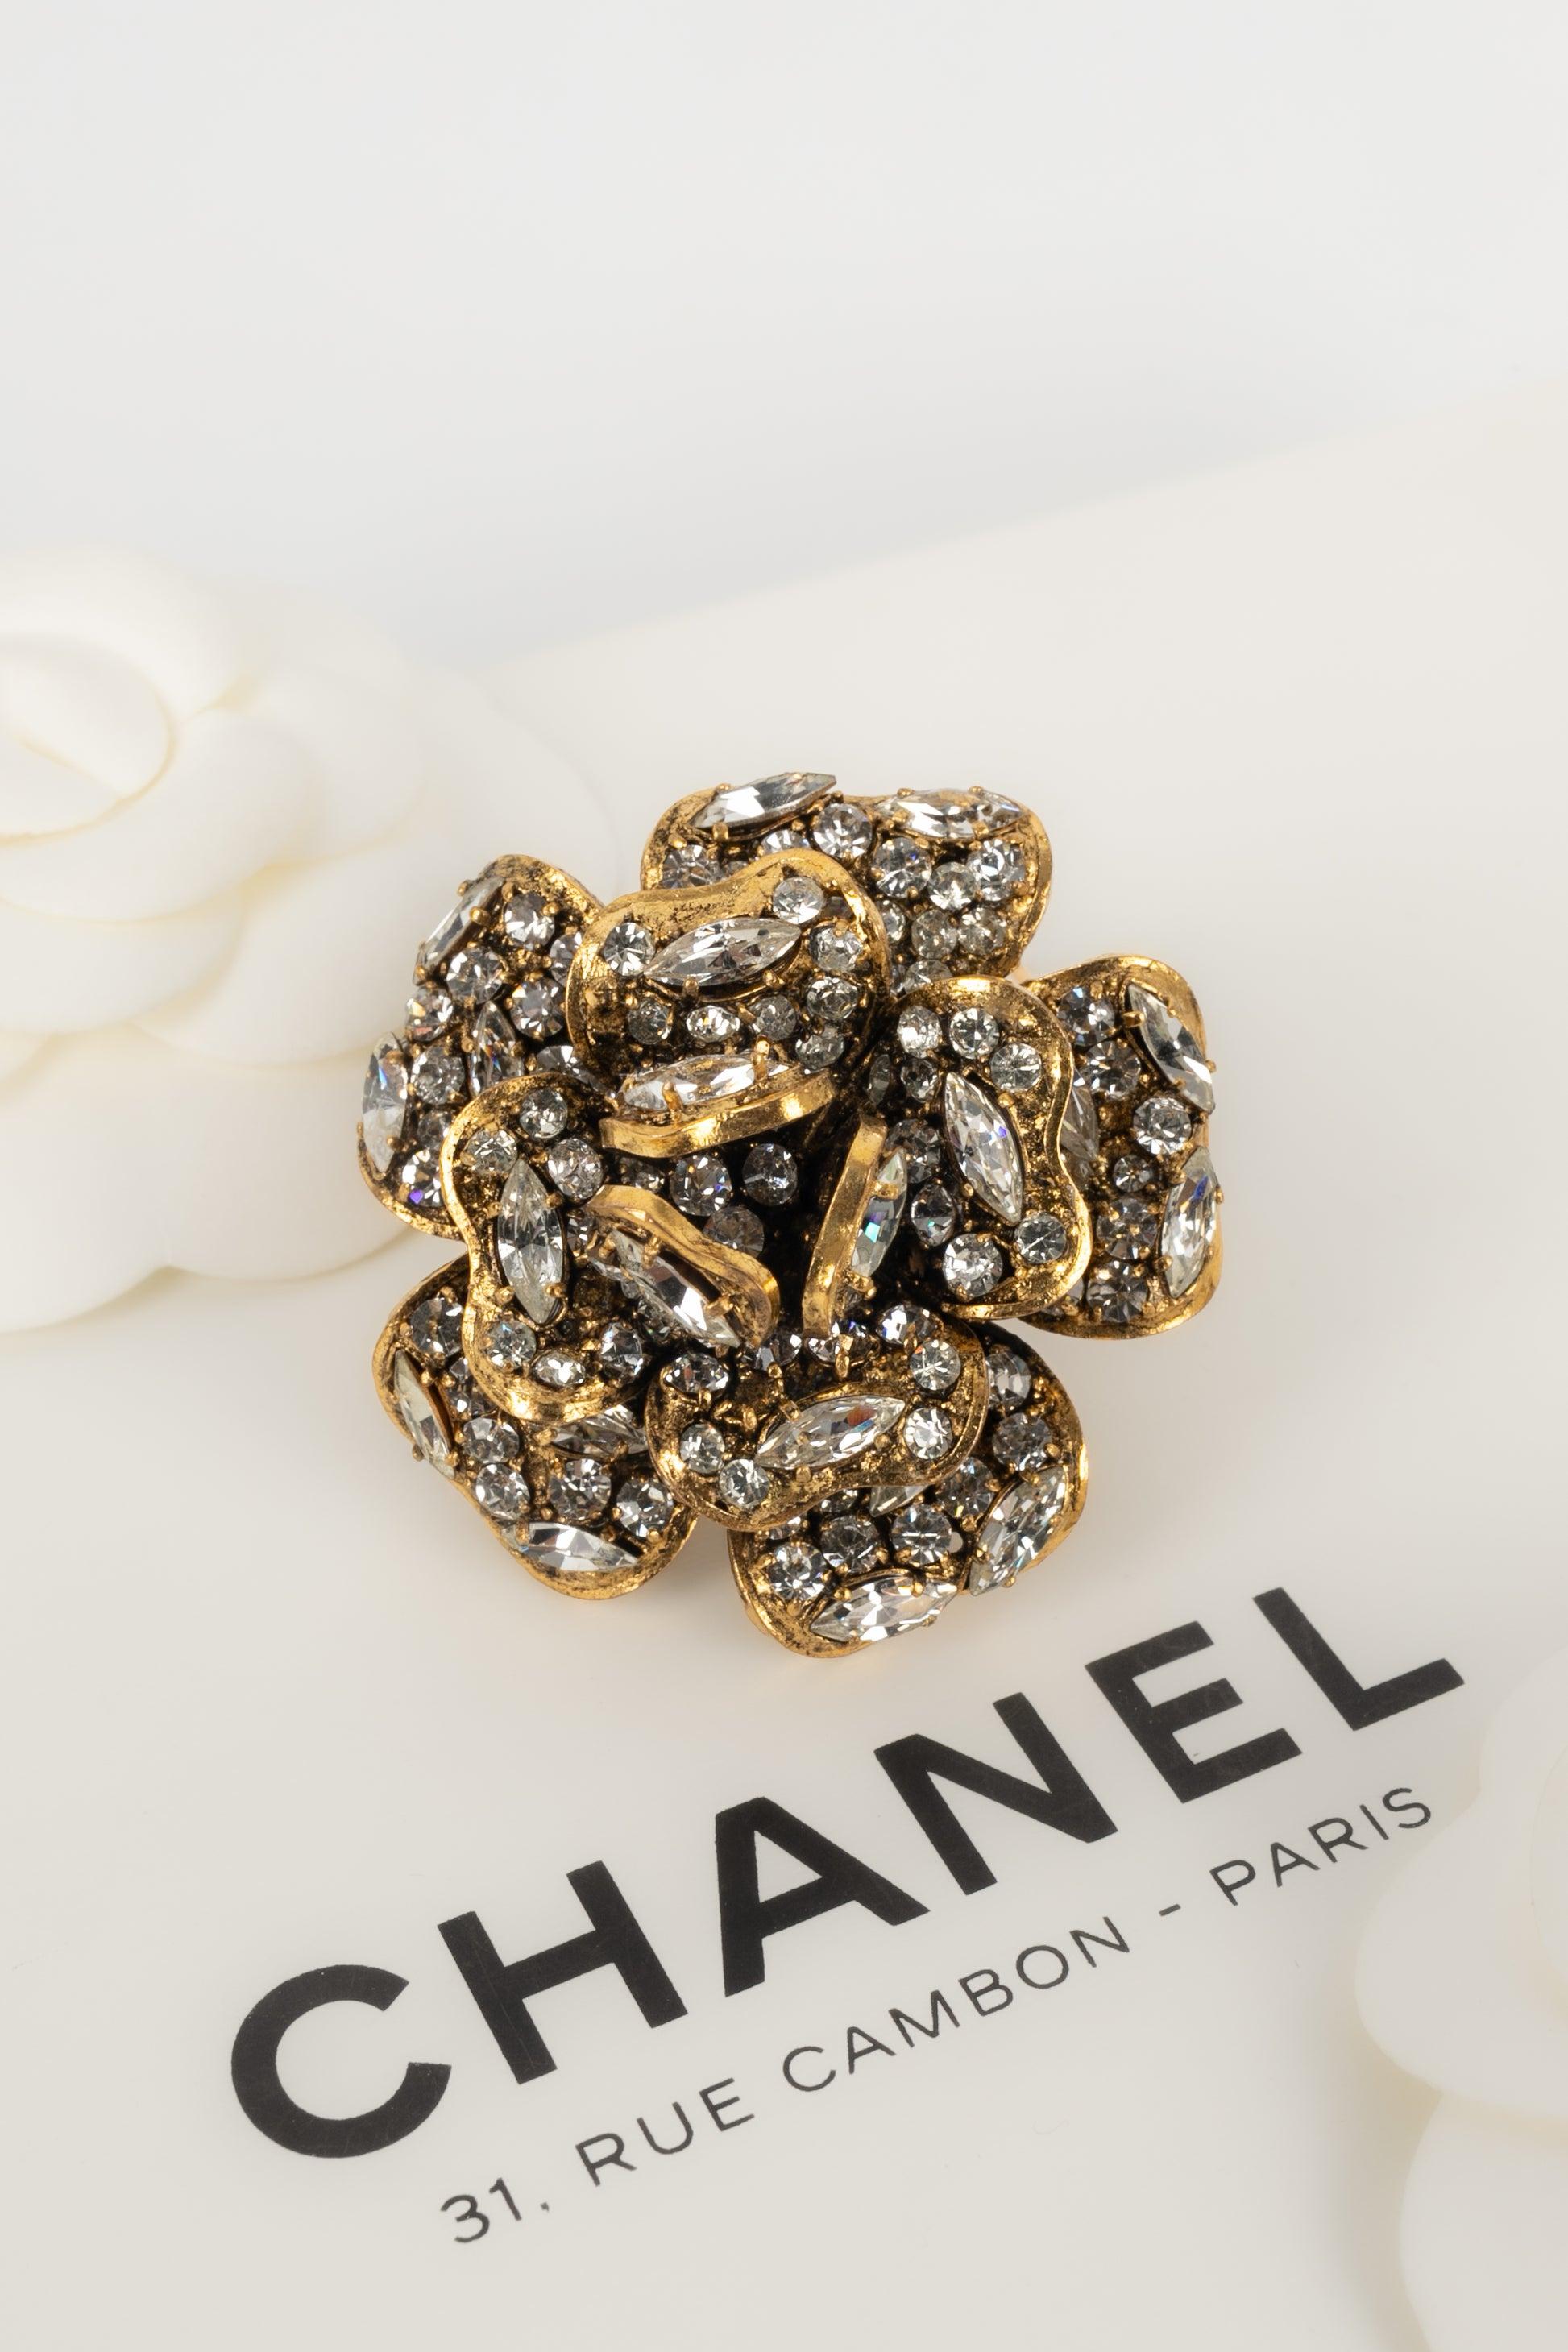 Chanel Golden Metal Brooch Ornamented with Rhinestones In Excellent Condition For Sale In SAINT-OUEN-SUR-SEINE, FR